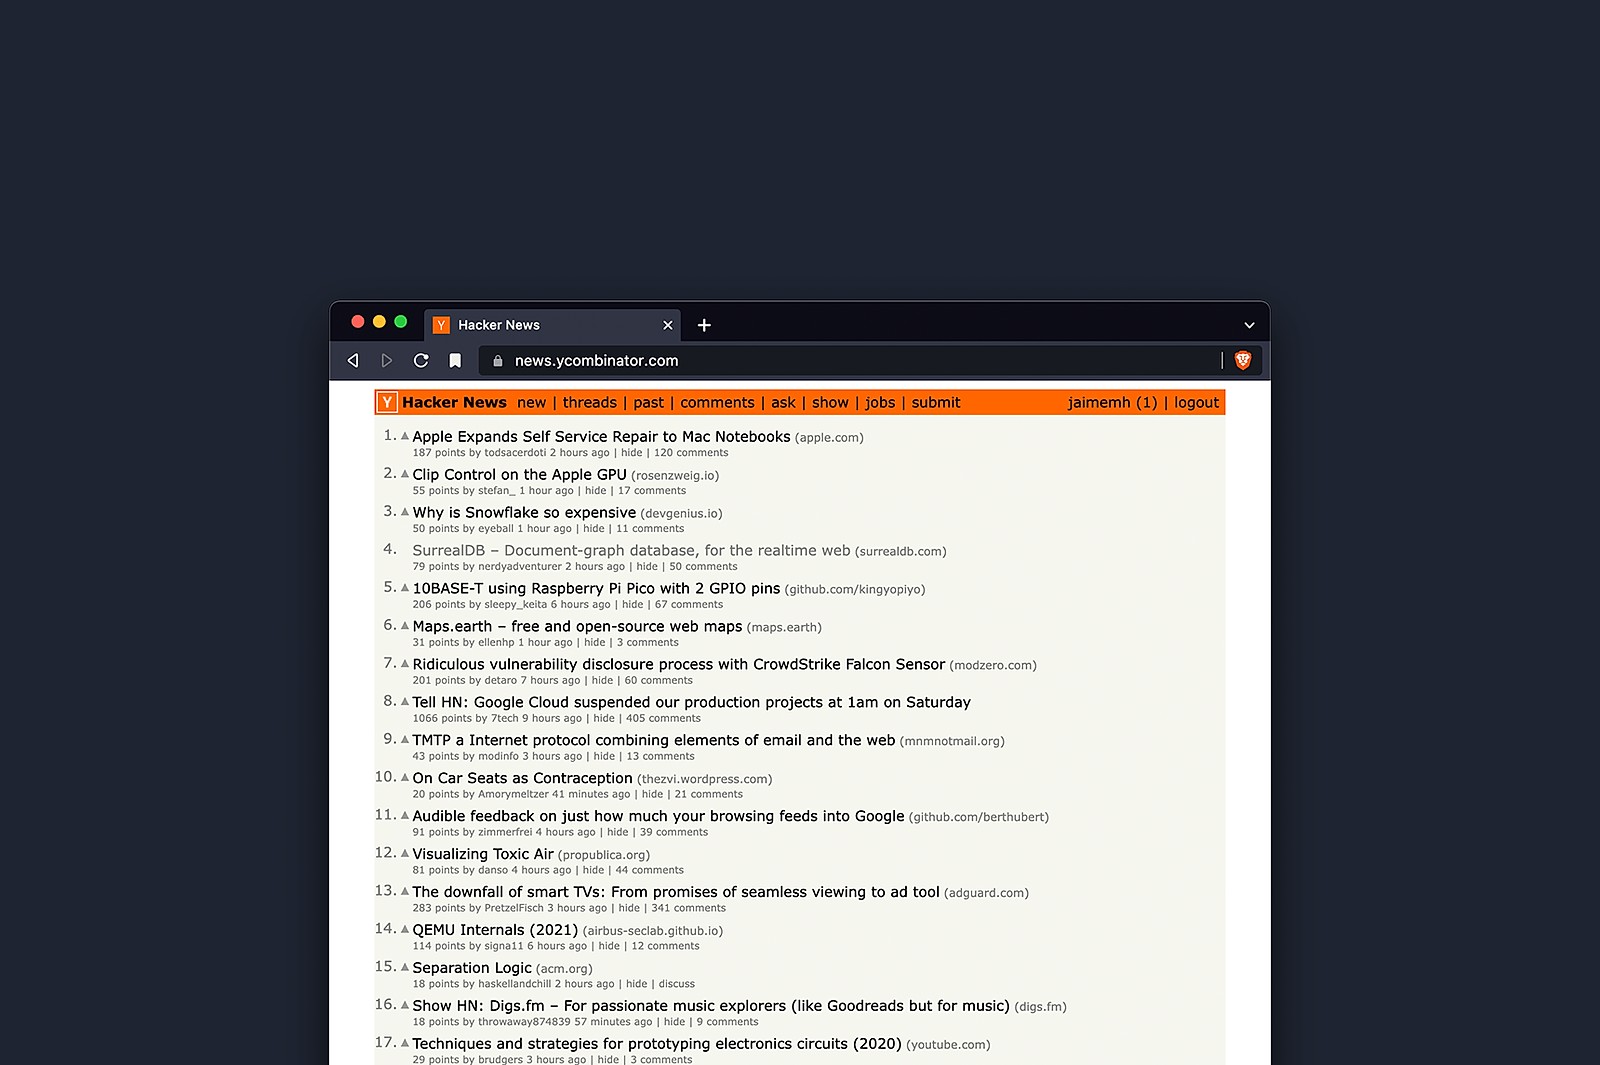 Honoured to be #4 on the front page of Hacker News